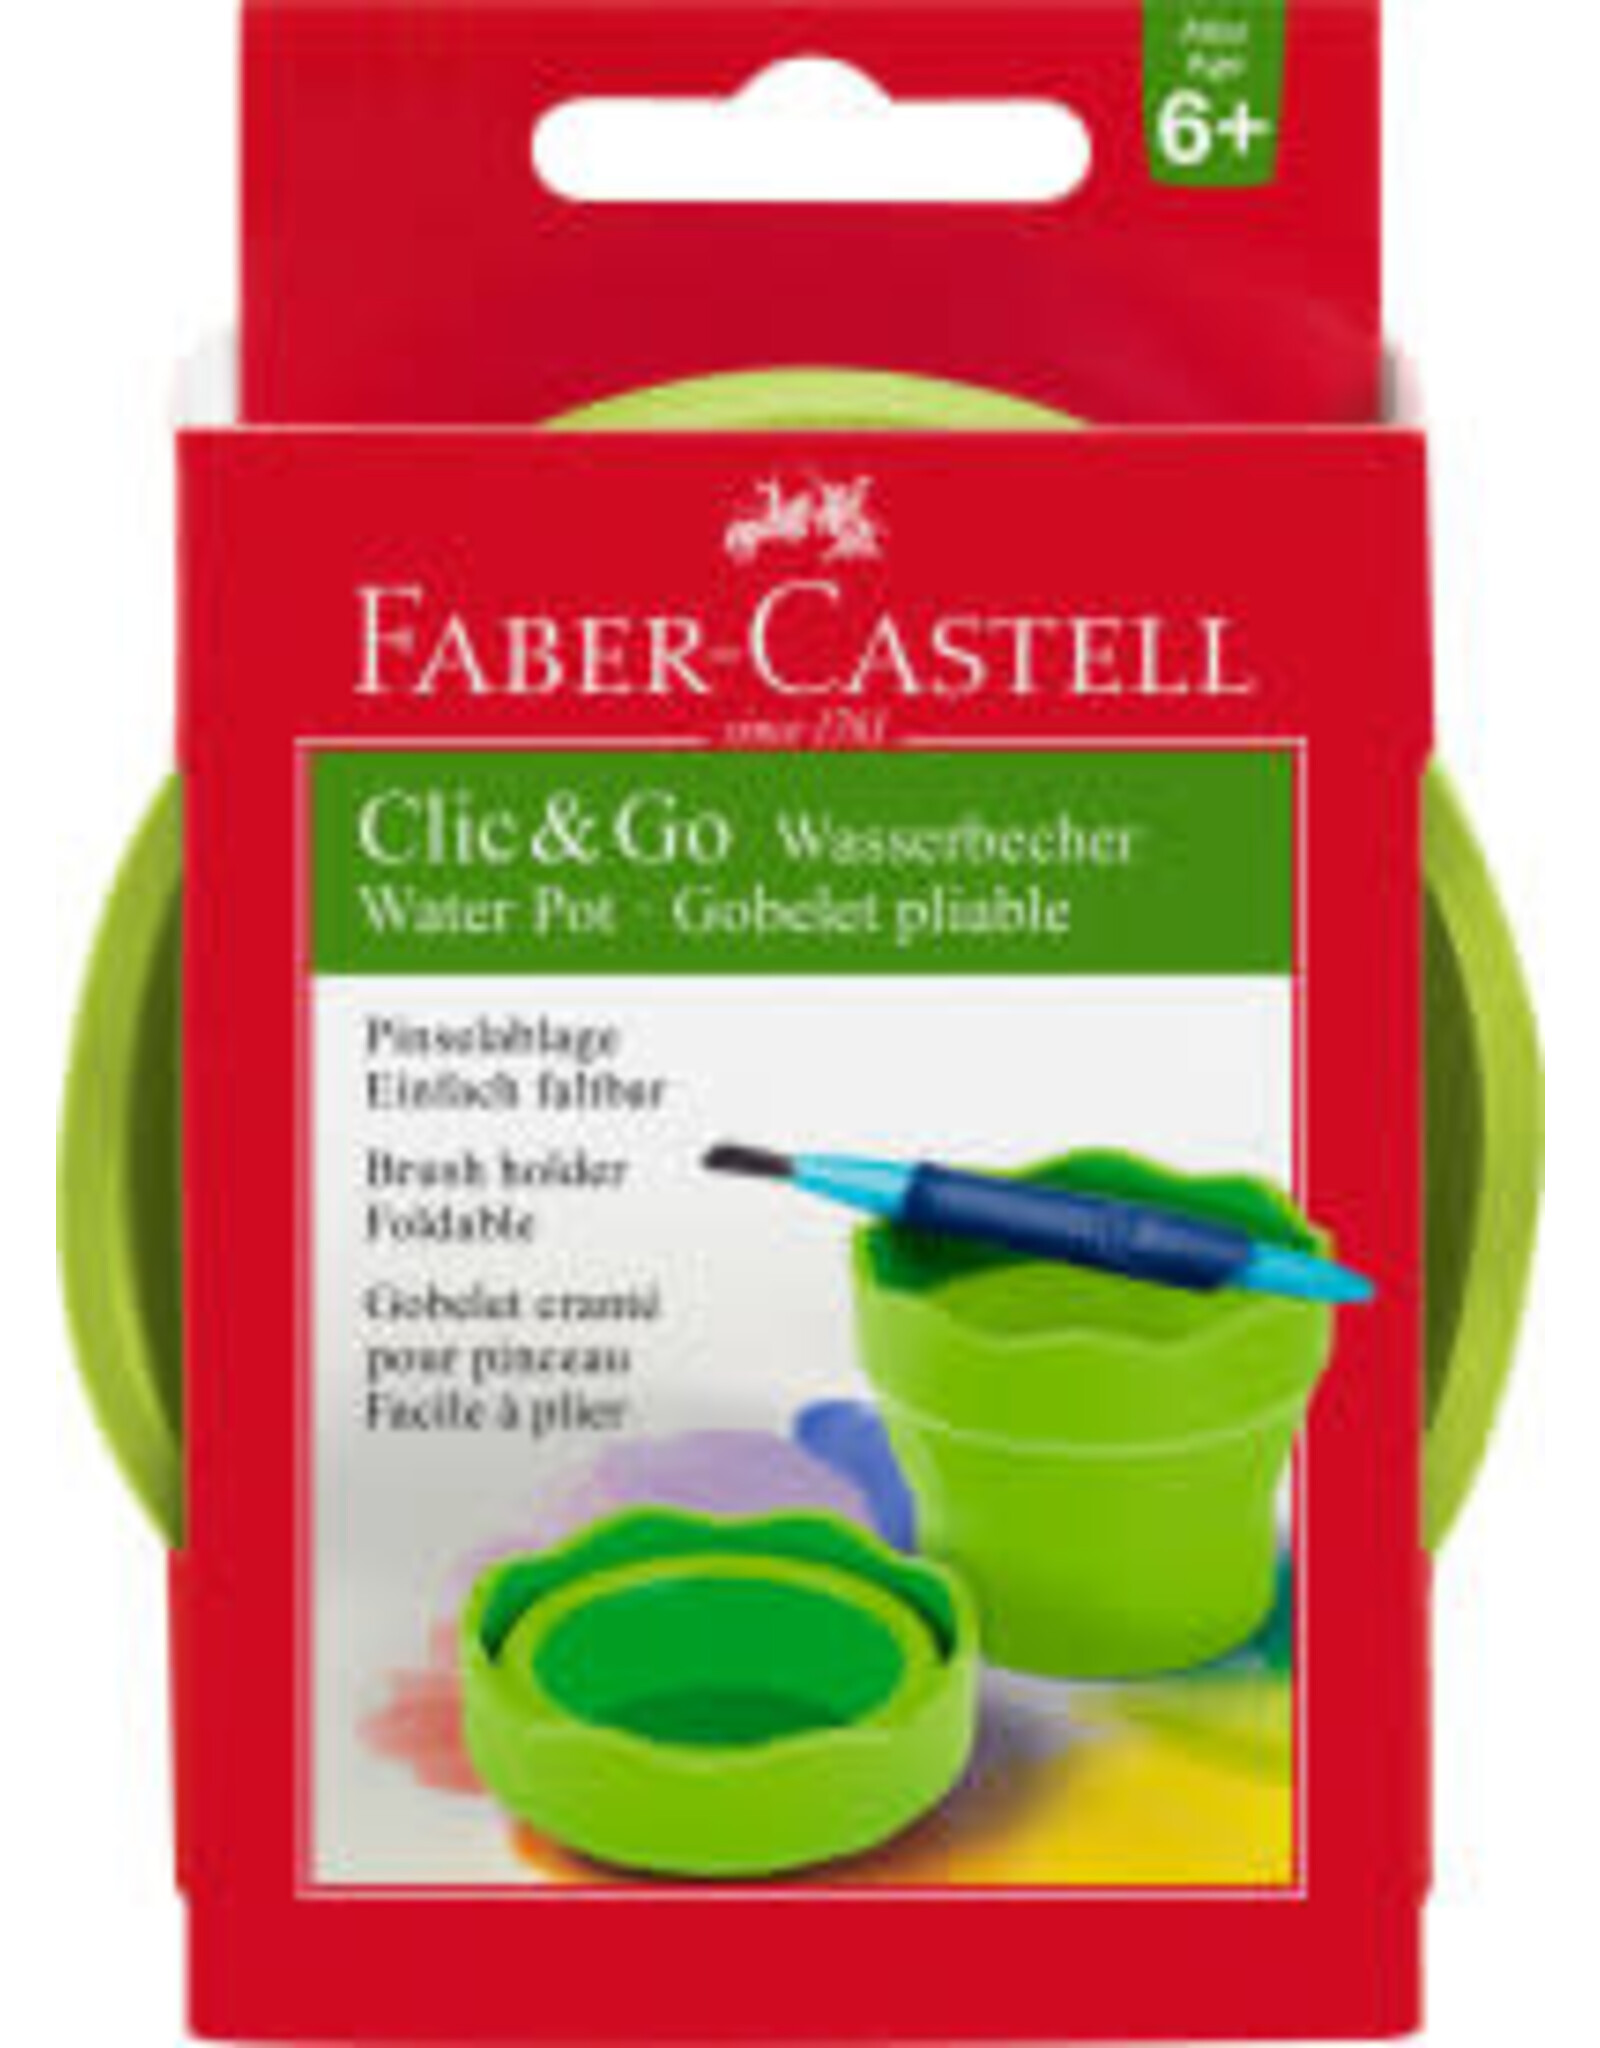 Faber-Castell Clic & Go Collapsible Water Cup - Green